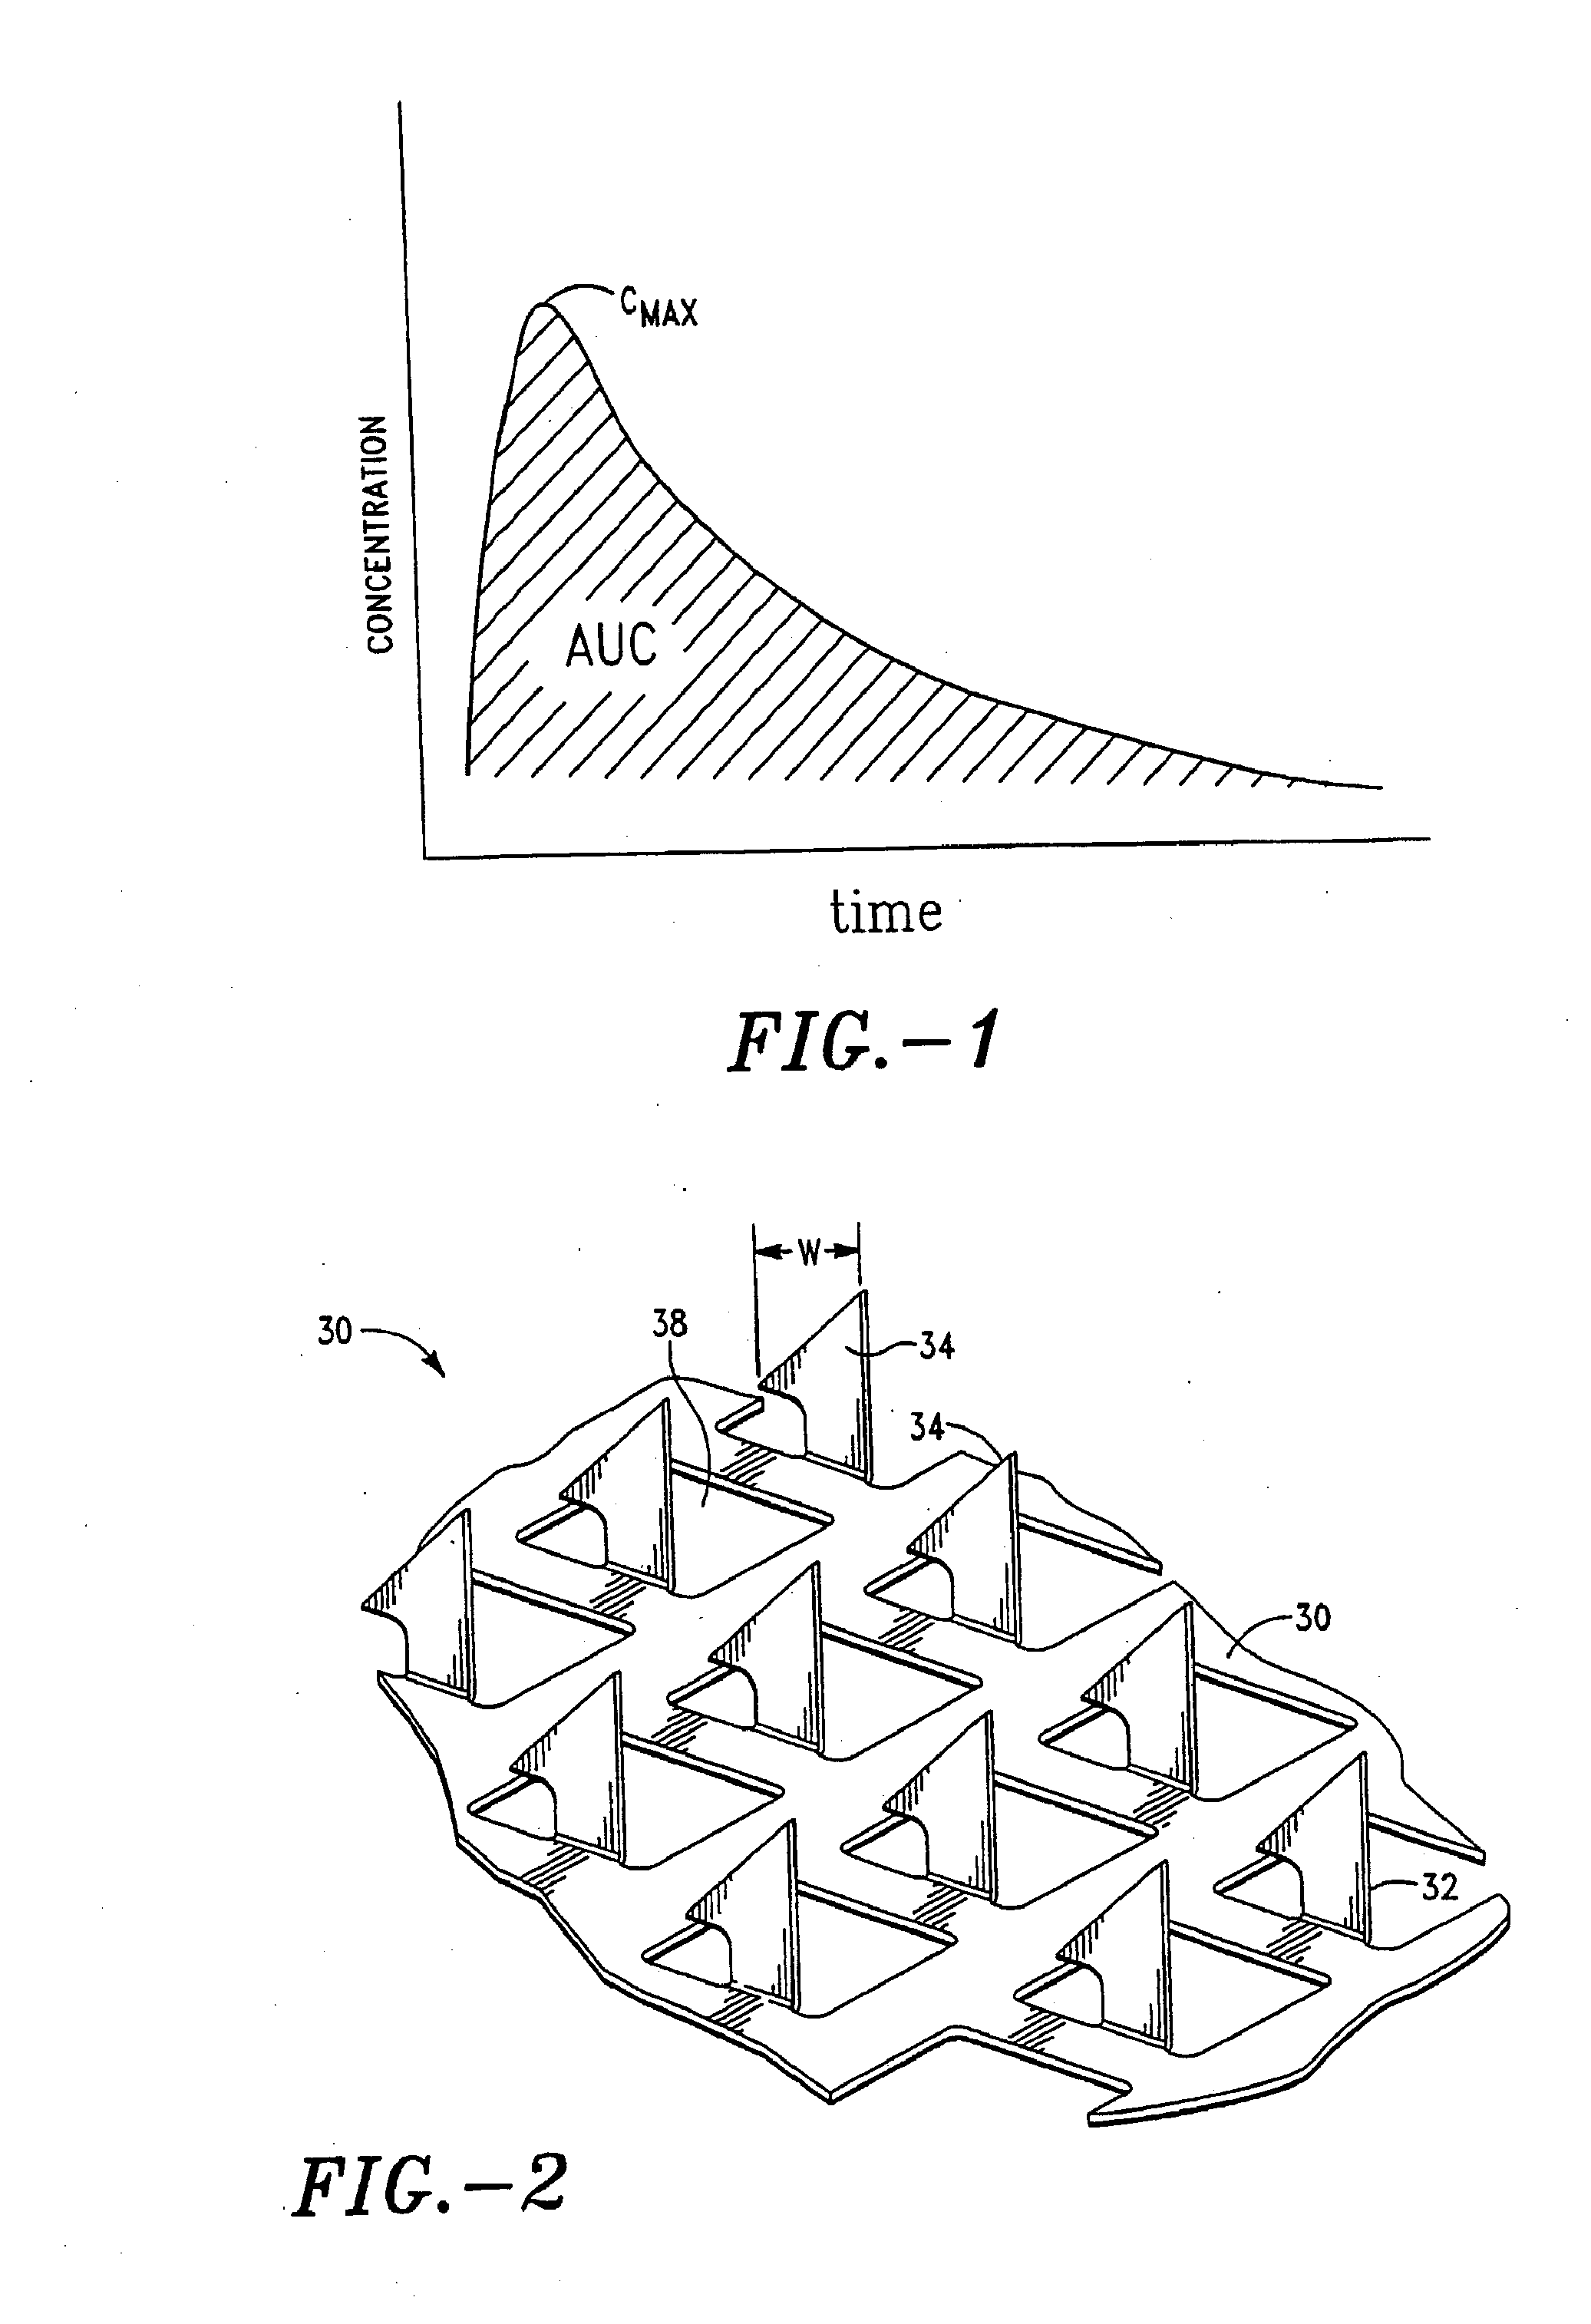 Apparatus and Method for Transdermal Delivery of Parathyroid Hormone Agents to Prevent or Treat Osteopenia